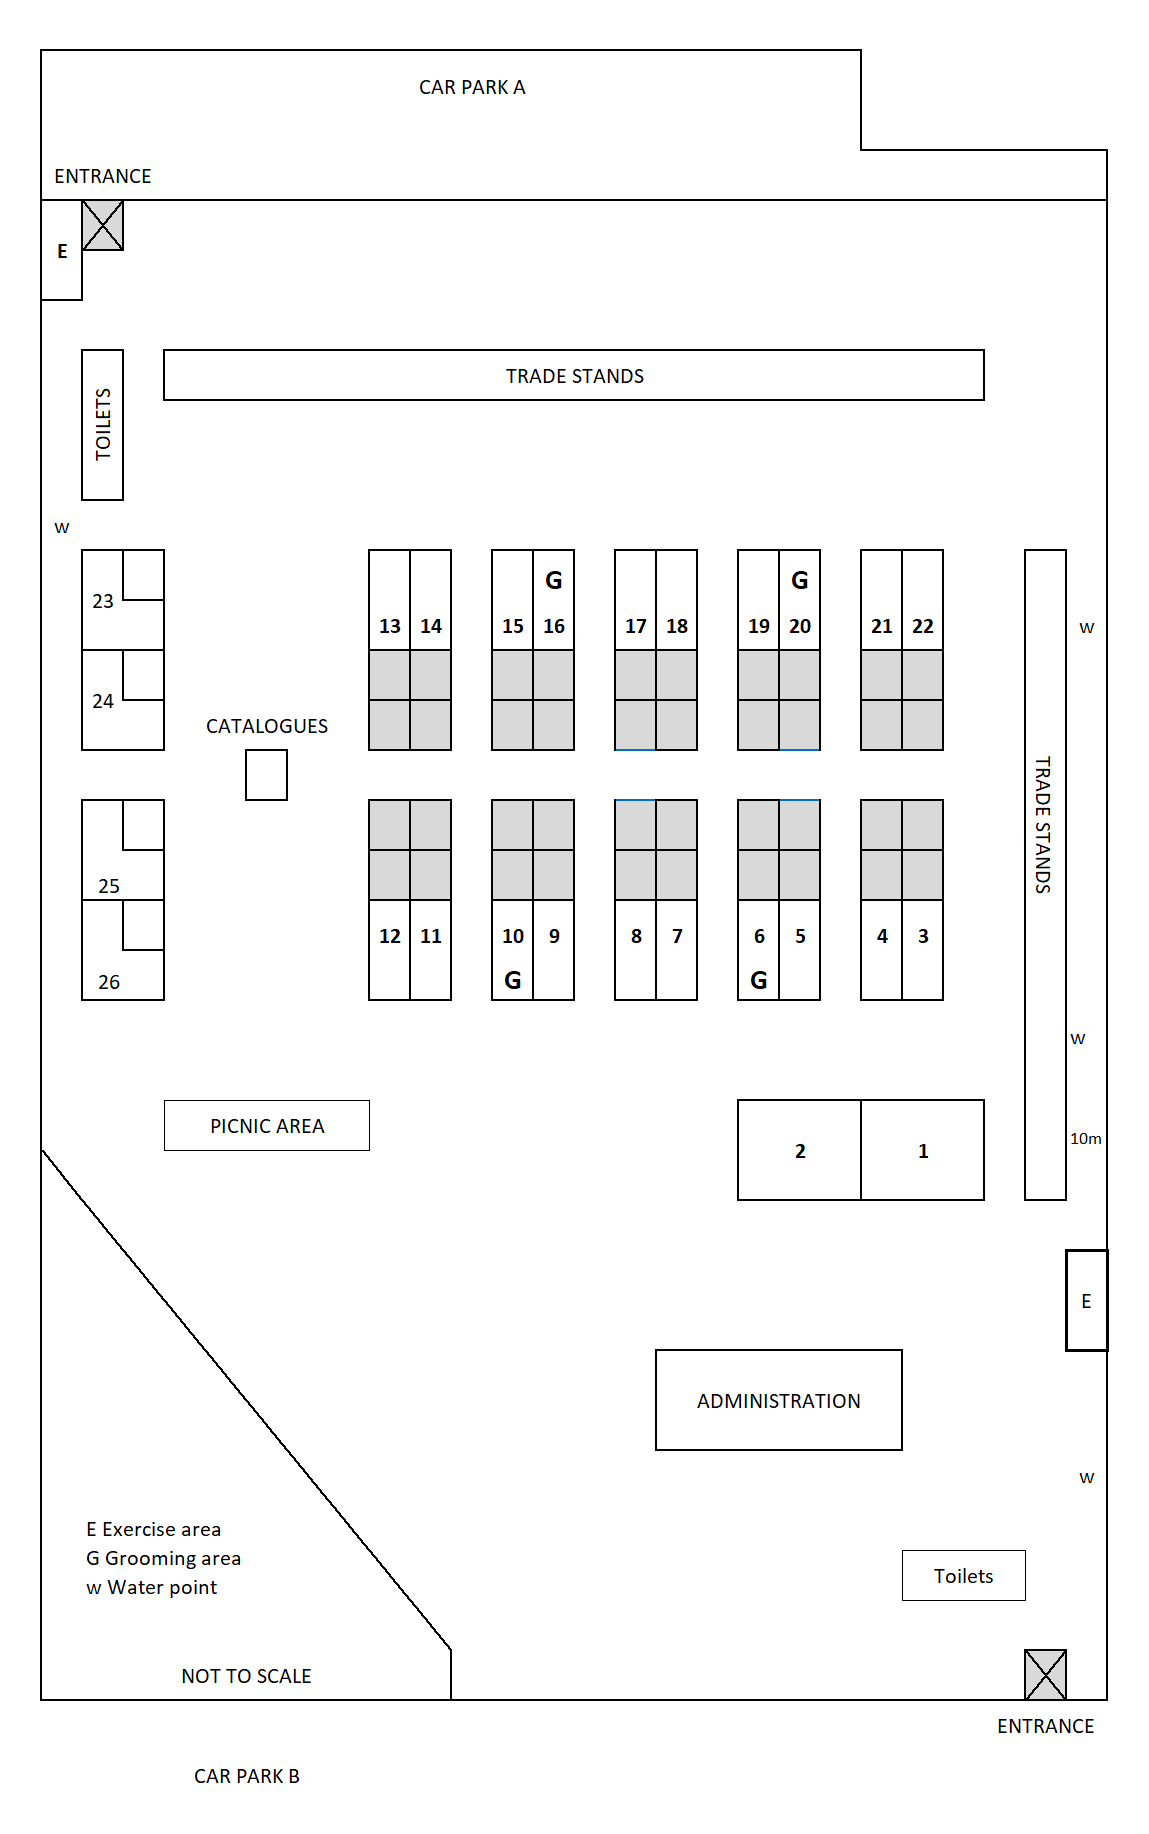 Show Layout